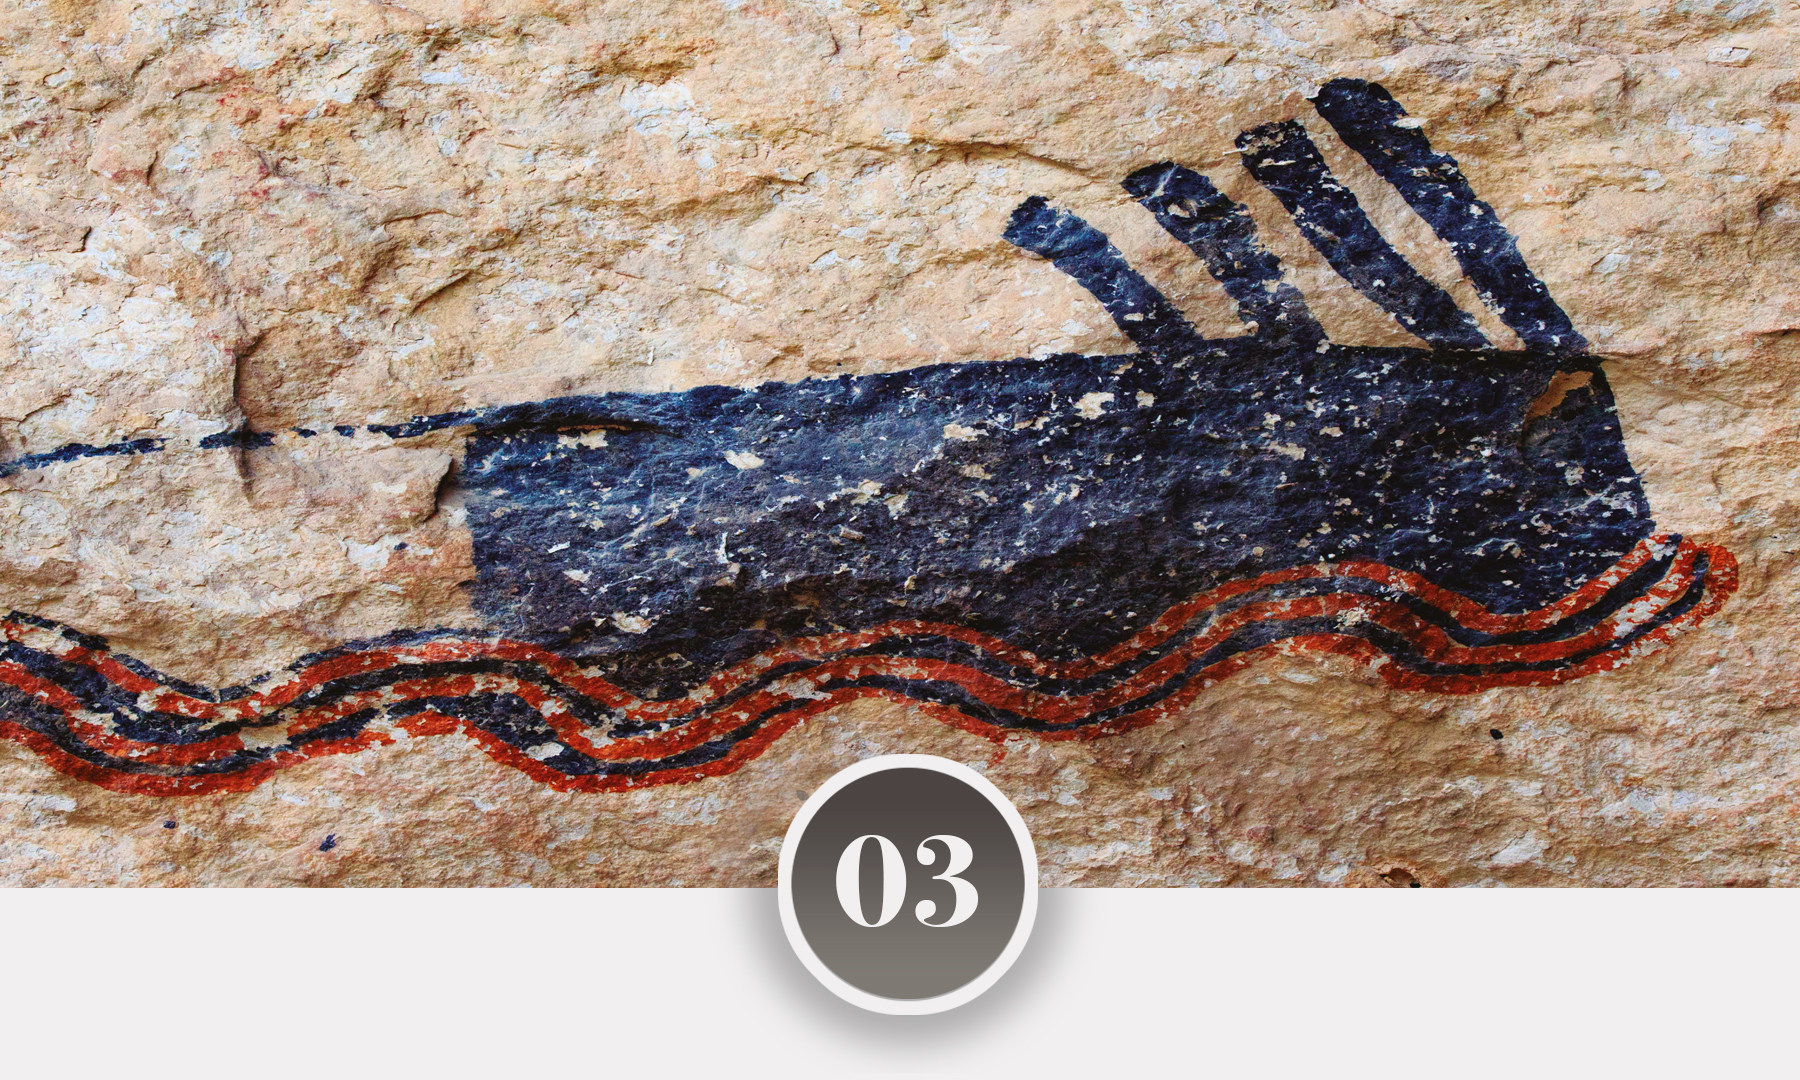 Color Engenders Life Hunter-Gatherer Rock Art in the Lower Pecos Canyonlands